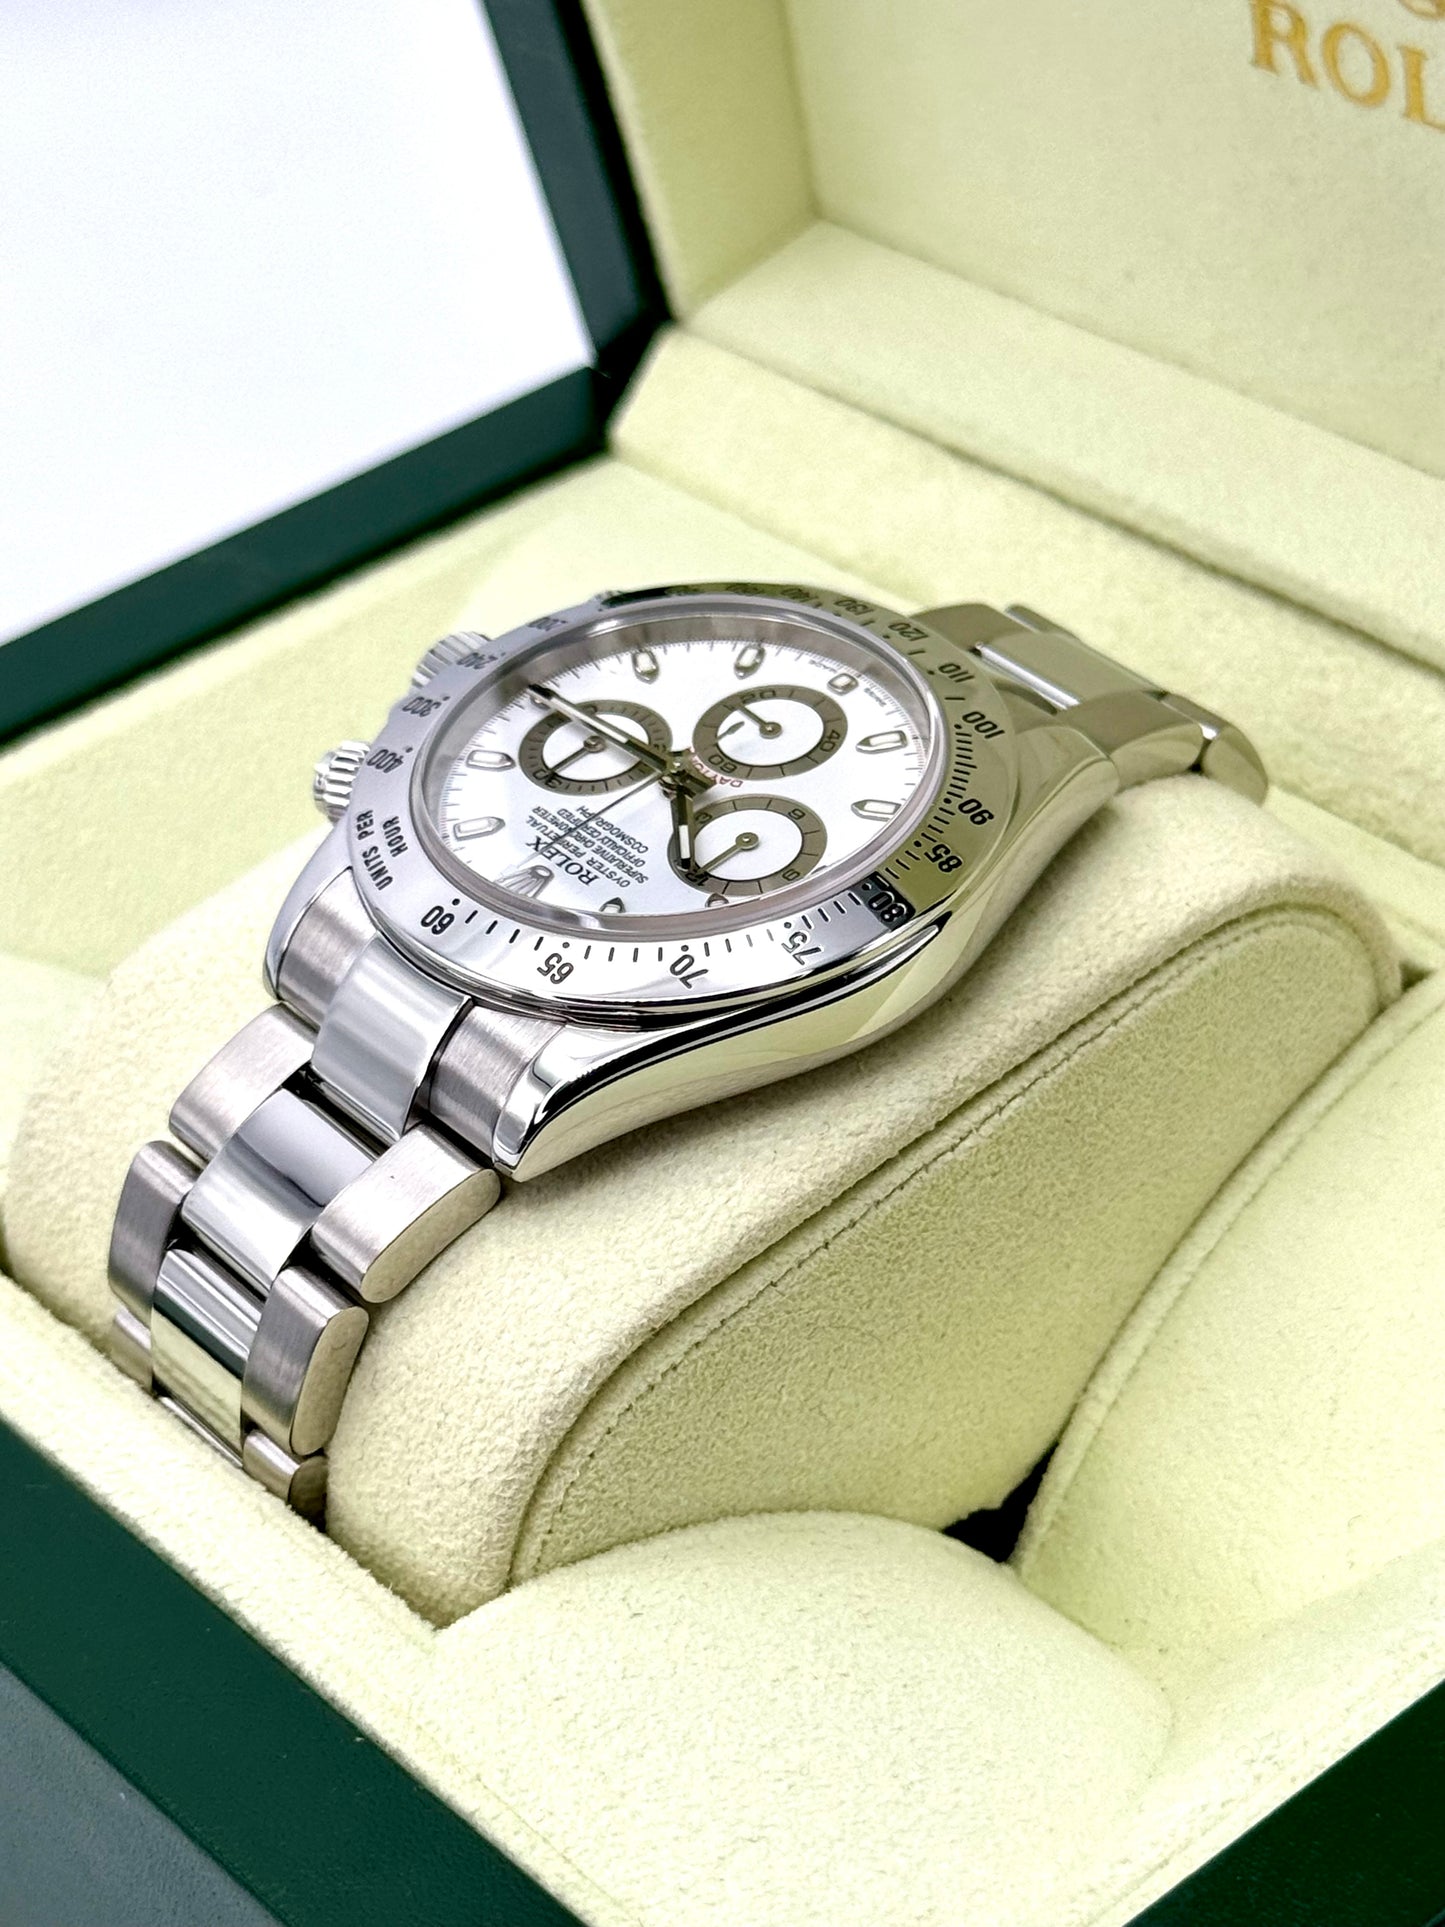 2005 Rolex Daytona 40mm 116520 Stainless Steel White Dial - MyWatchLLC